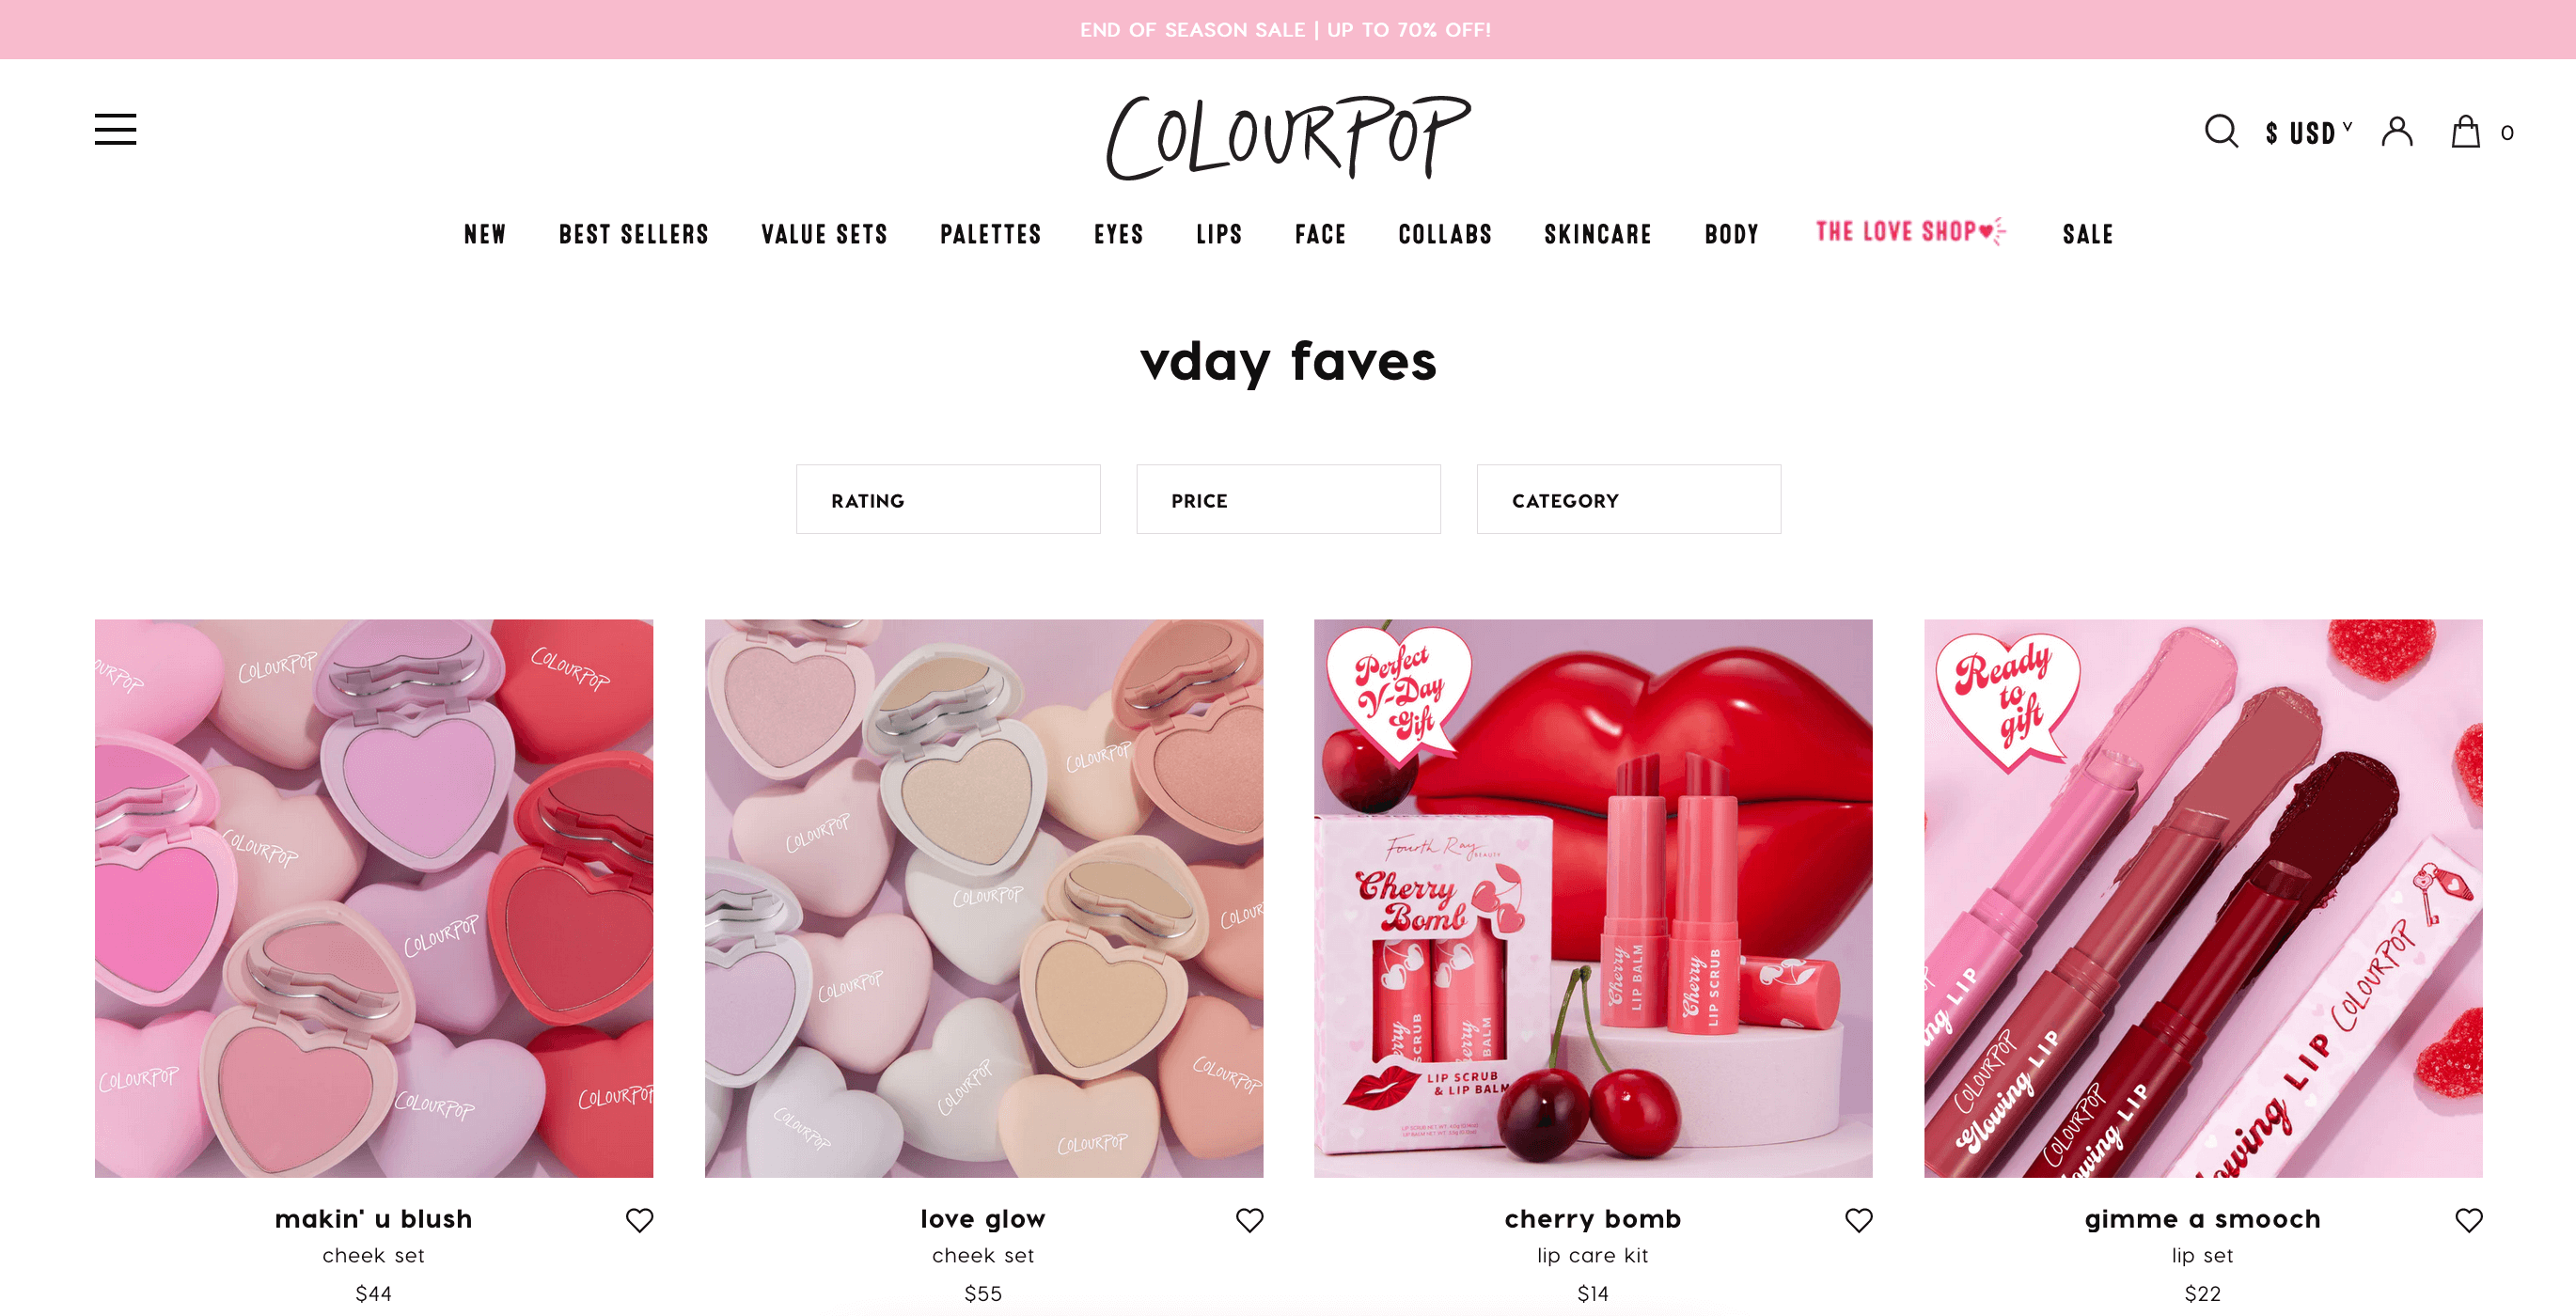 The Valentine’s Day section on Colourpop’s website